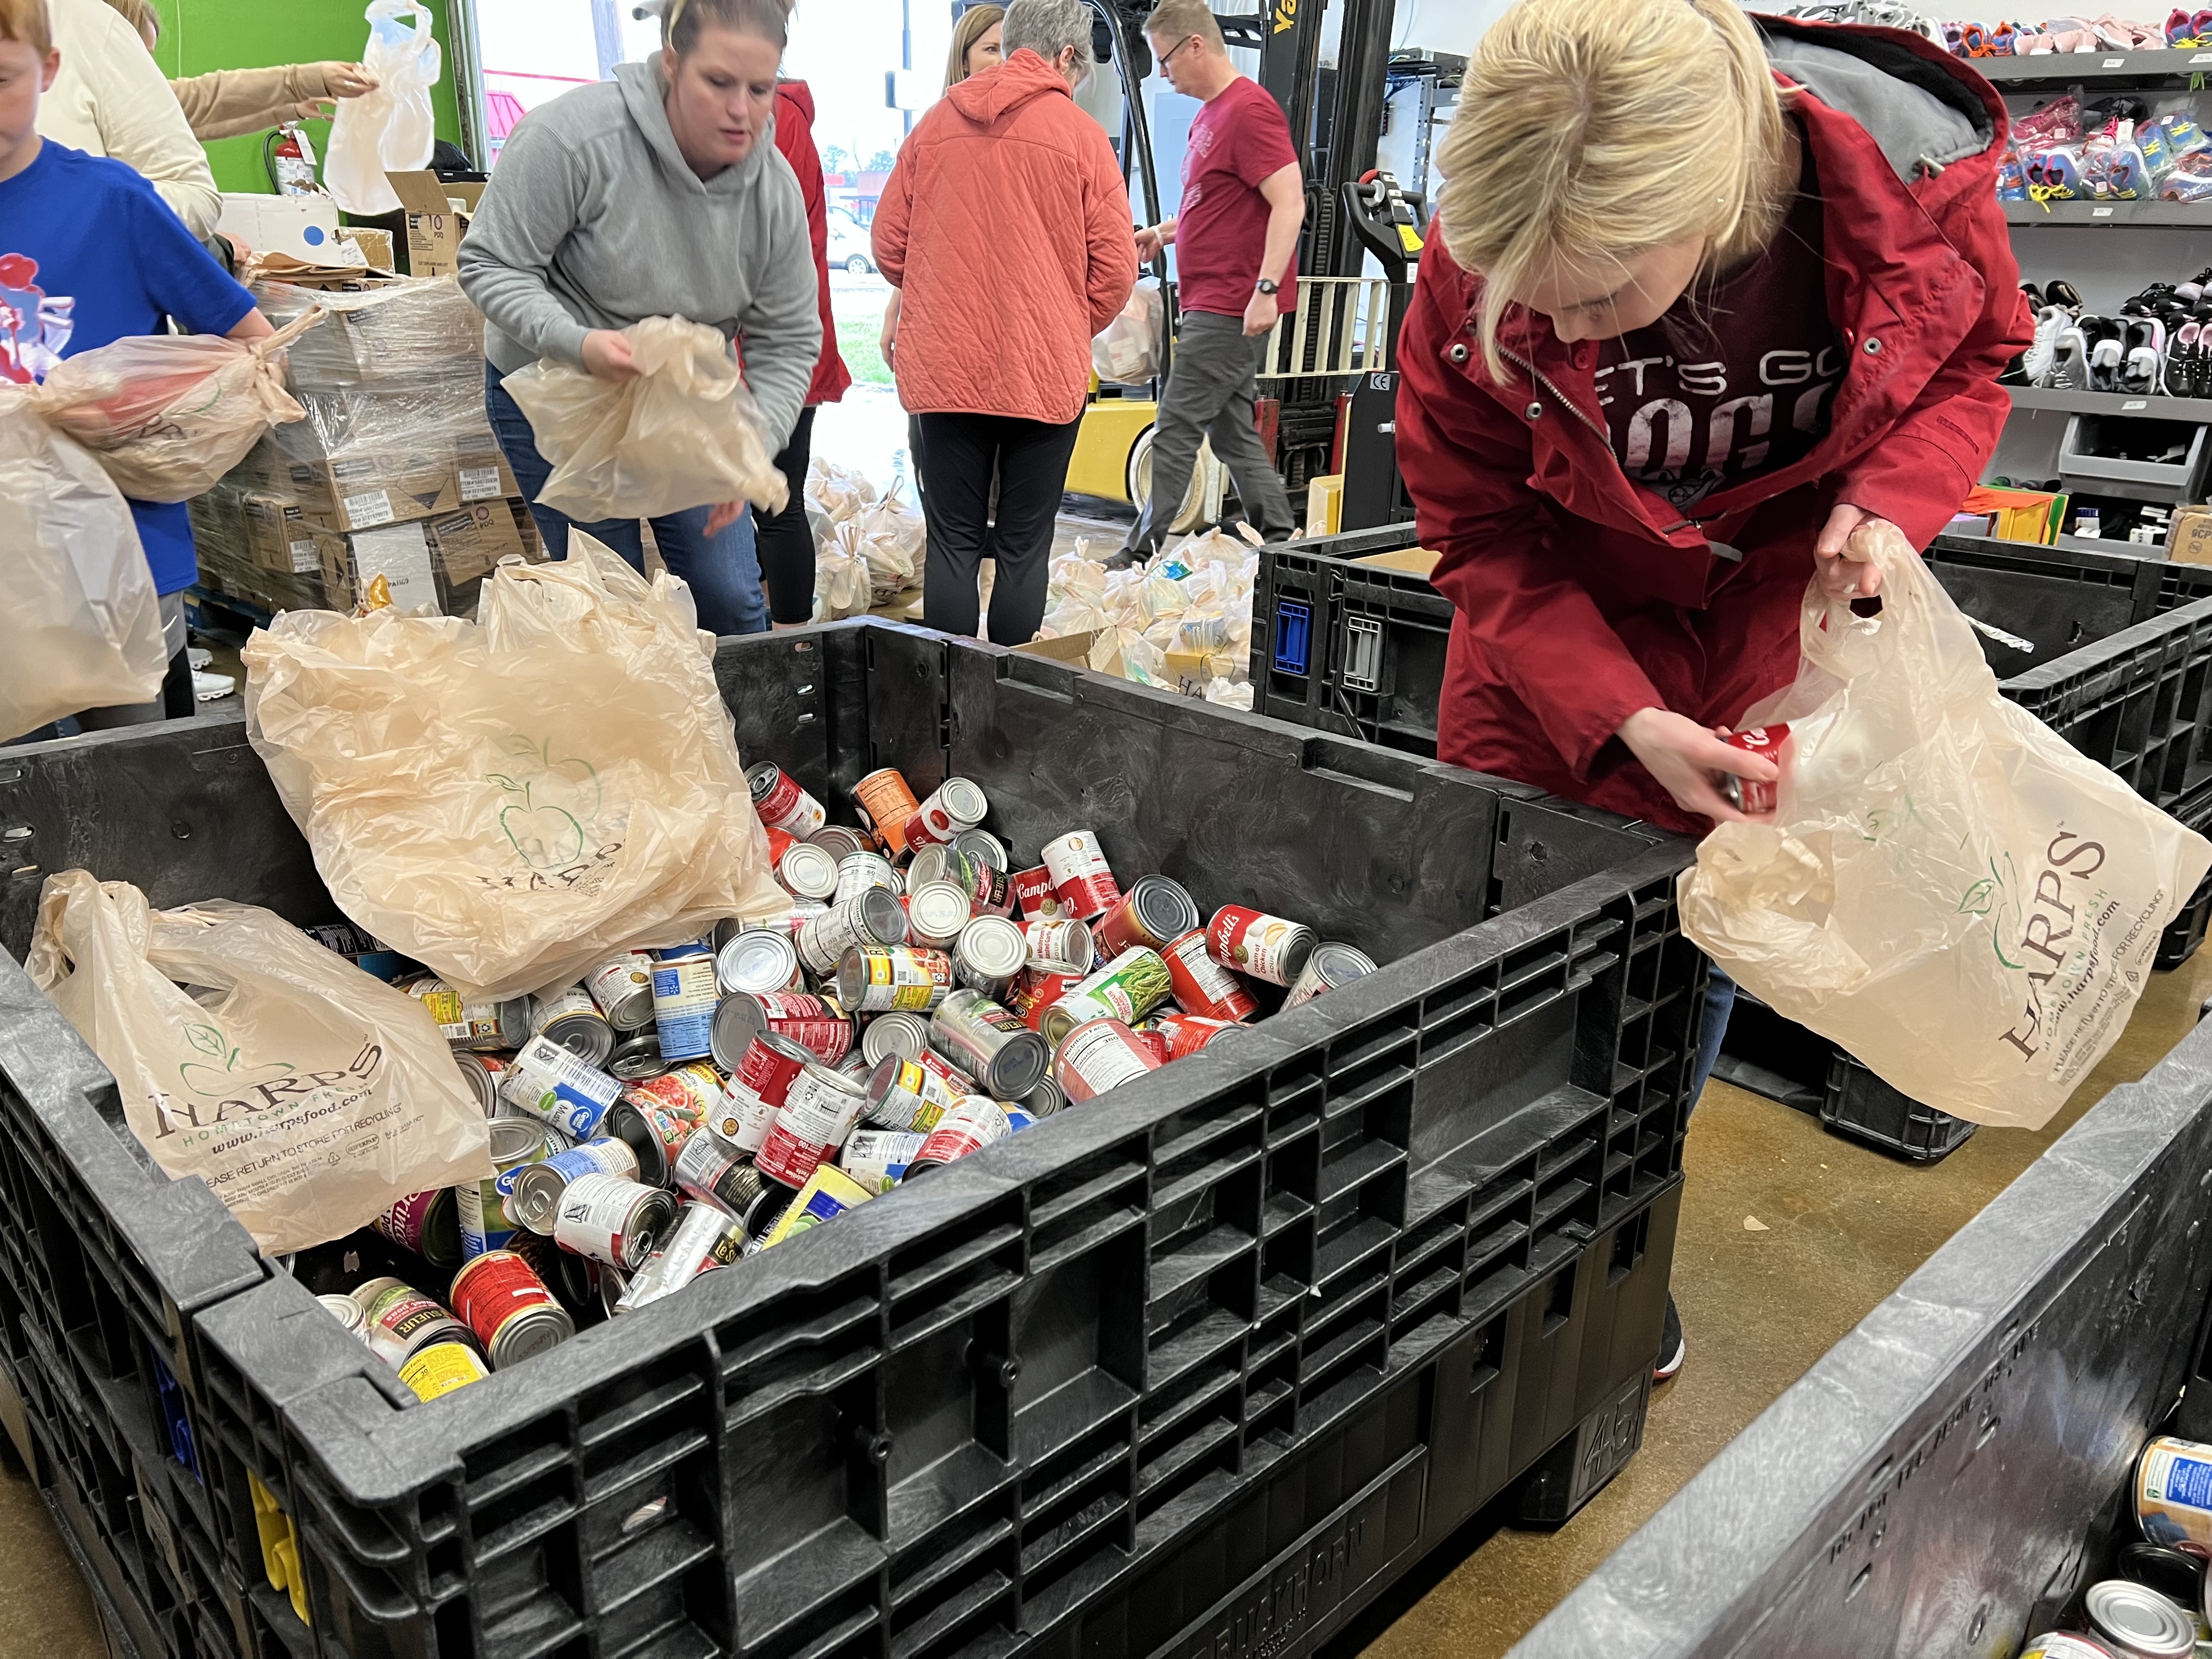 Donations being processed by Springdale staff